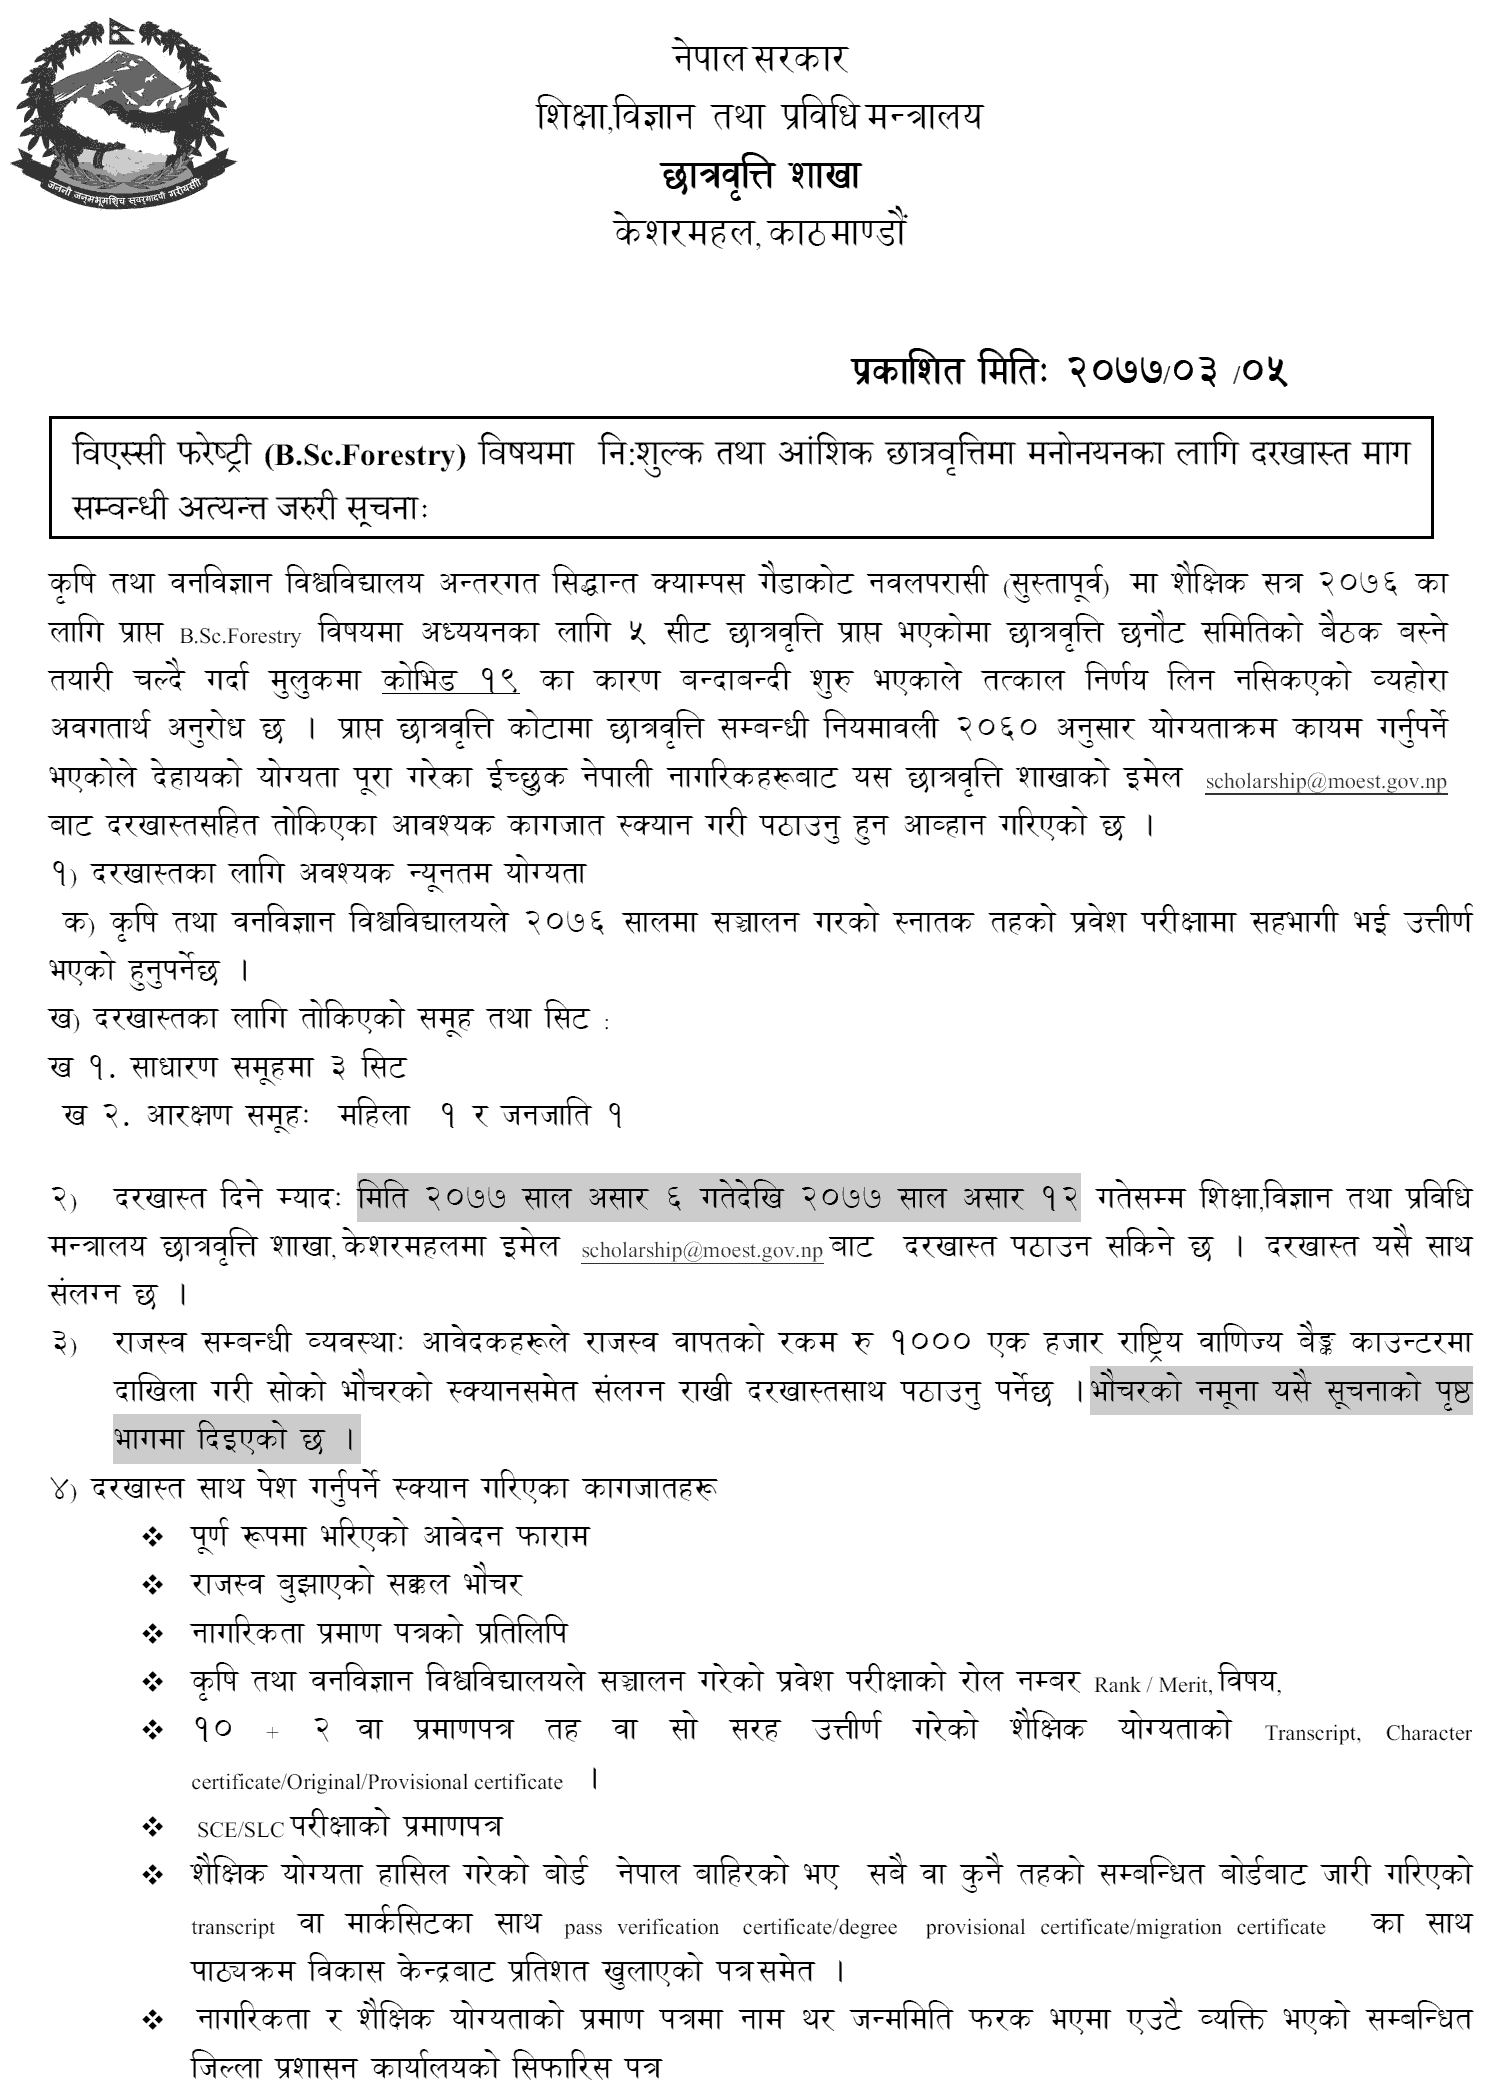 Nepal Government Free Scholarship for B.Sc Forestry